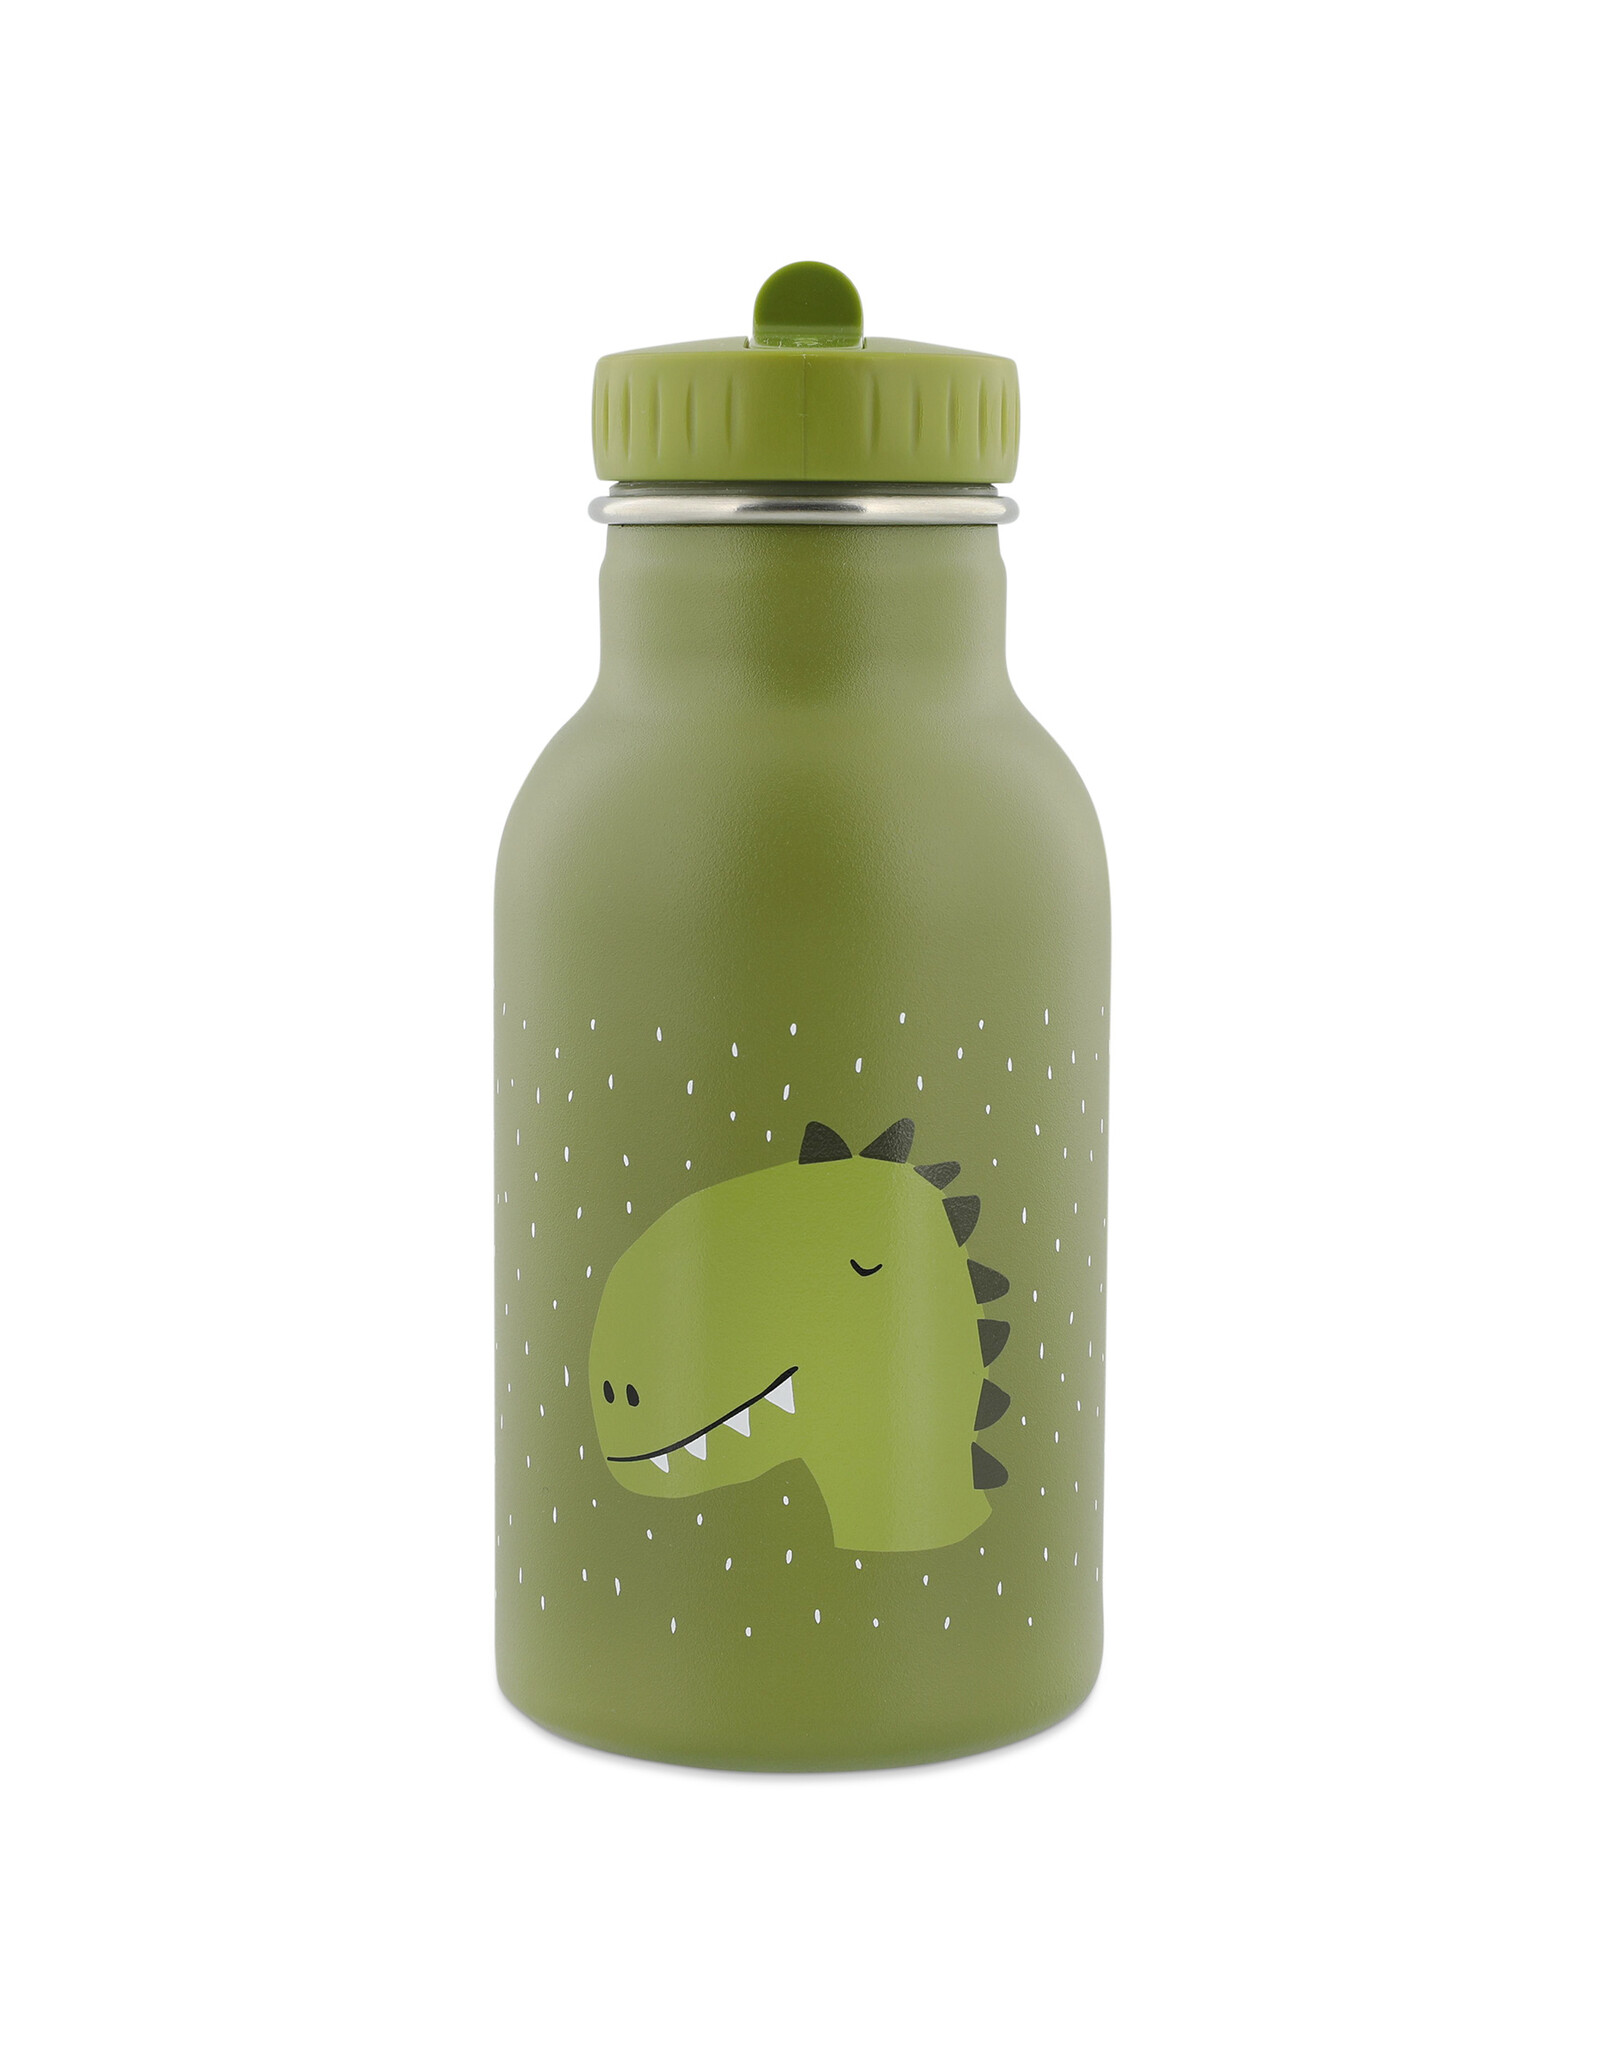 Trixie Gourde isotherme 350 ml - Mr. Dino